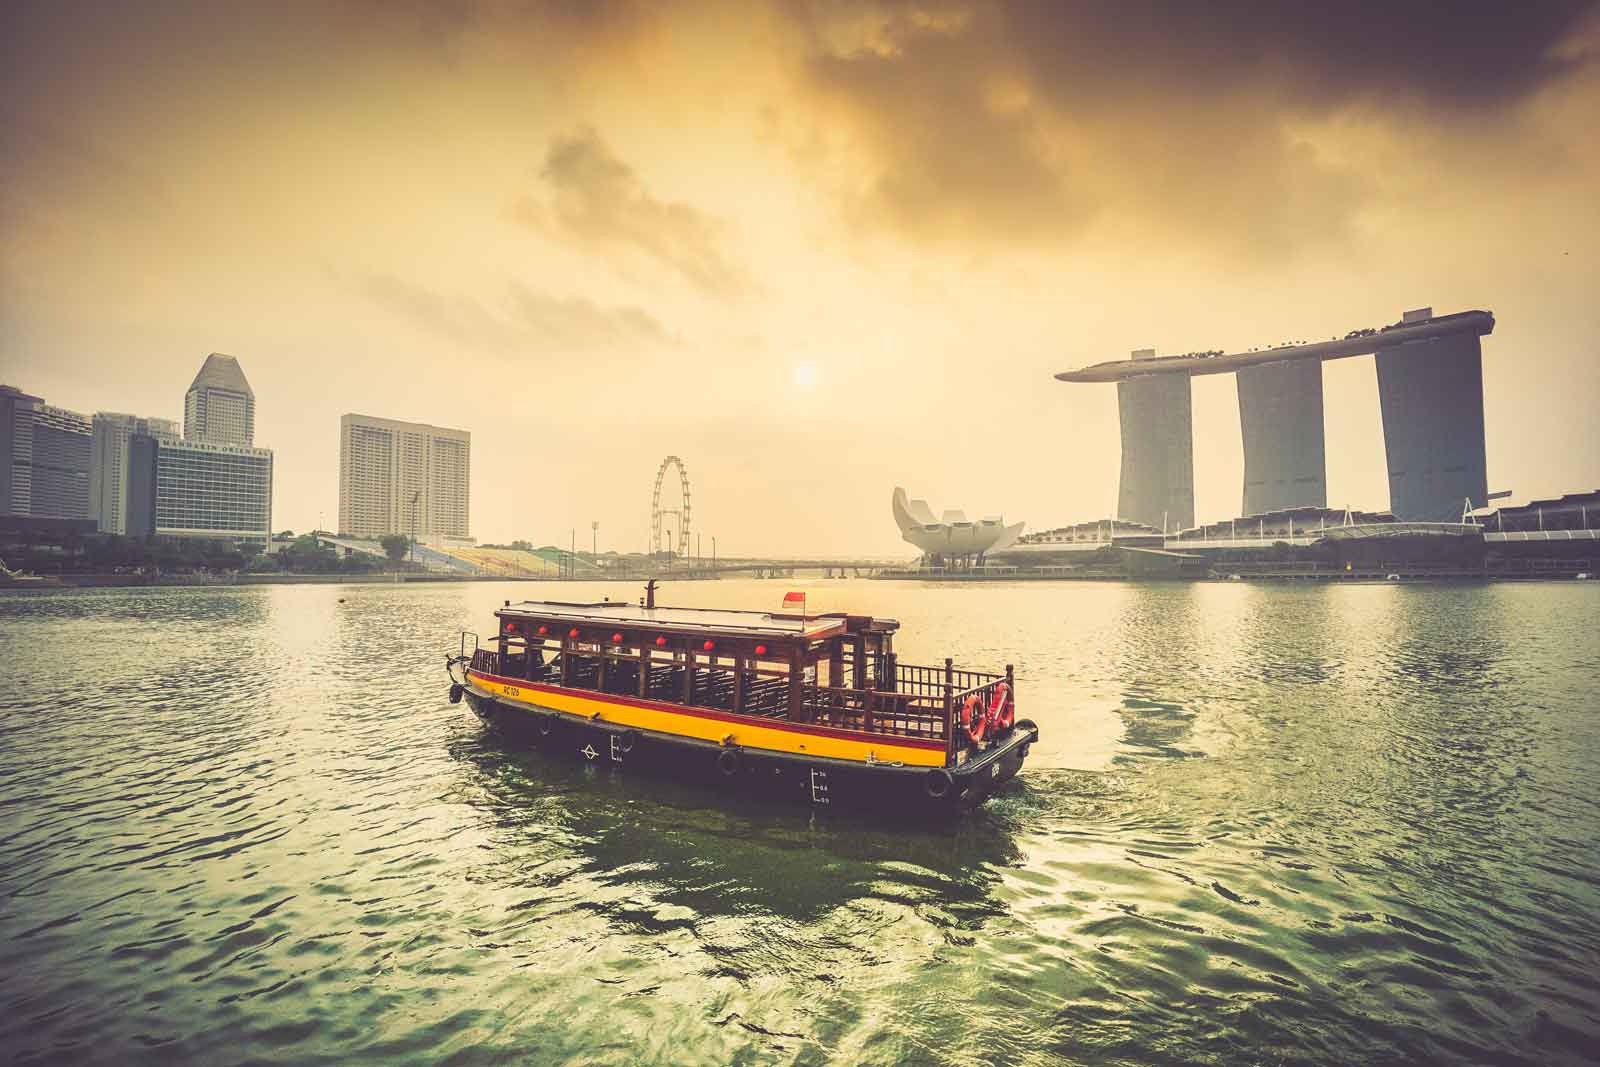 Junk boat in the harbor in front of Marina Bay Sands